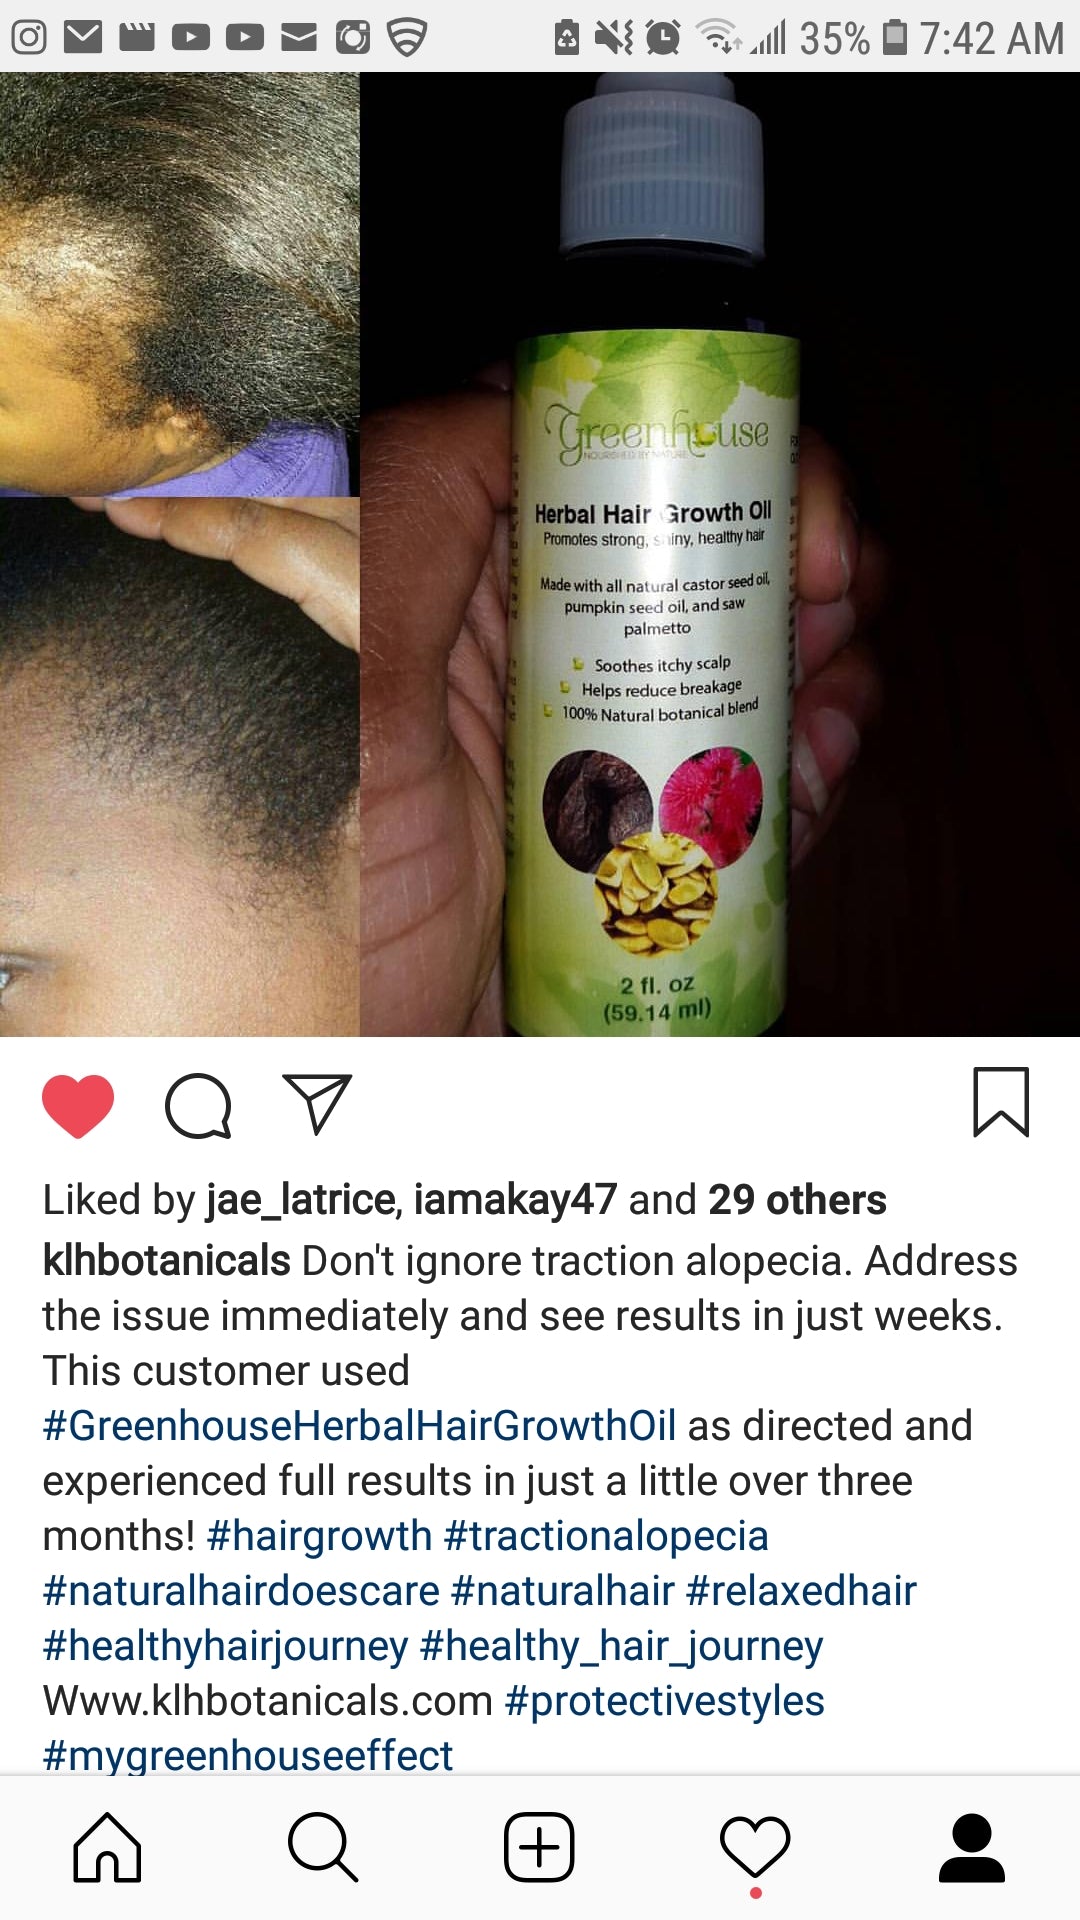 Greenhouse herbal hair growth oil before and after results